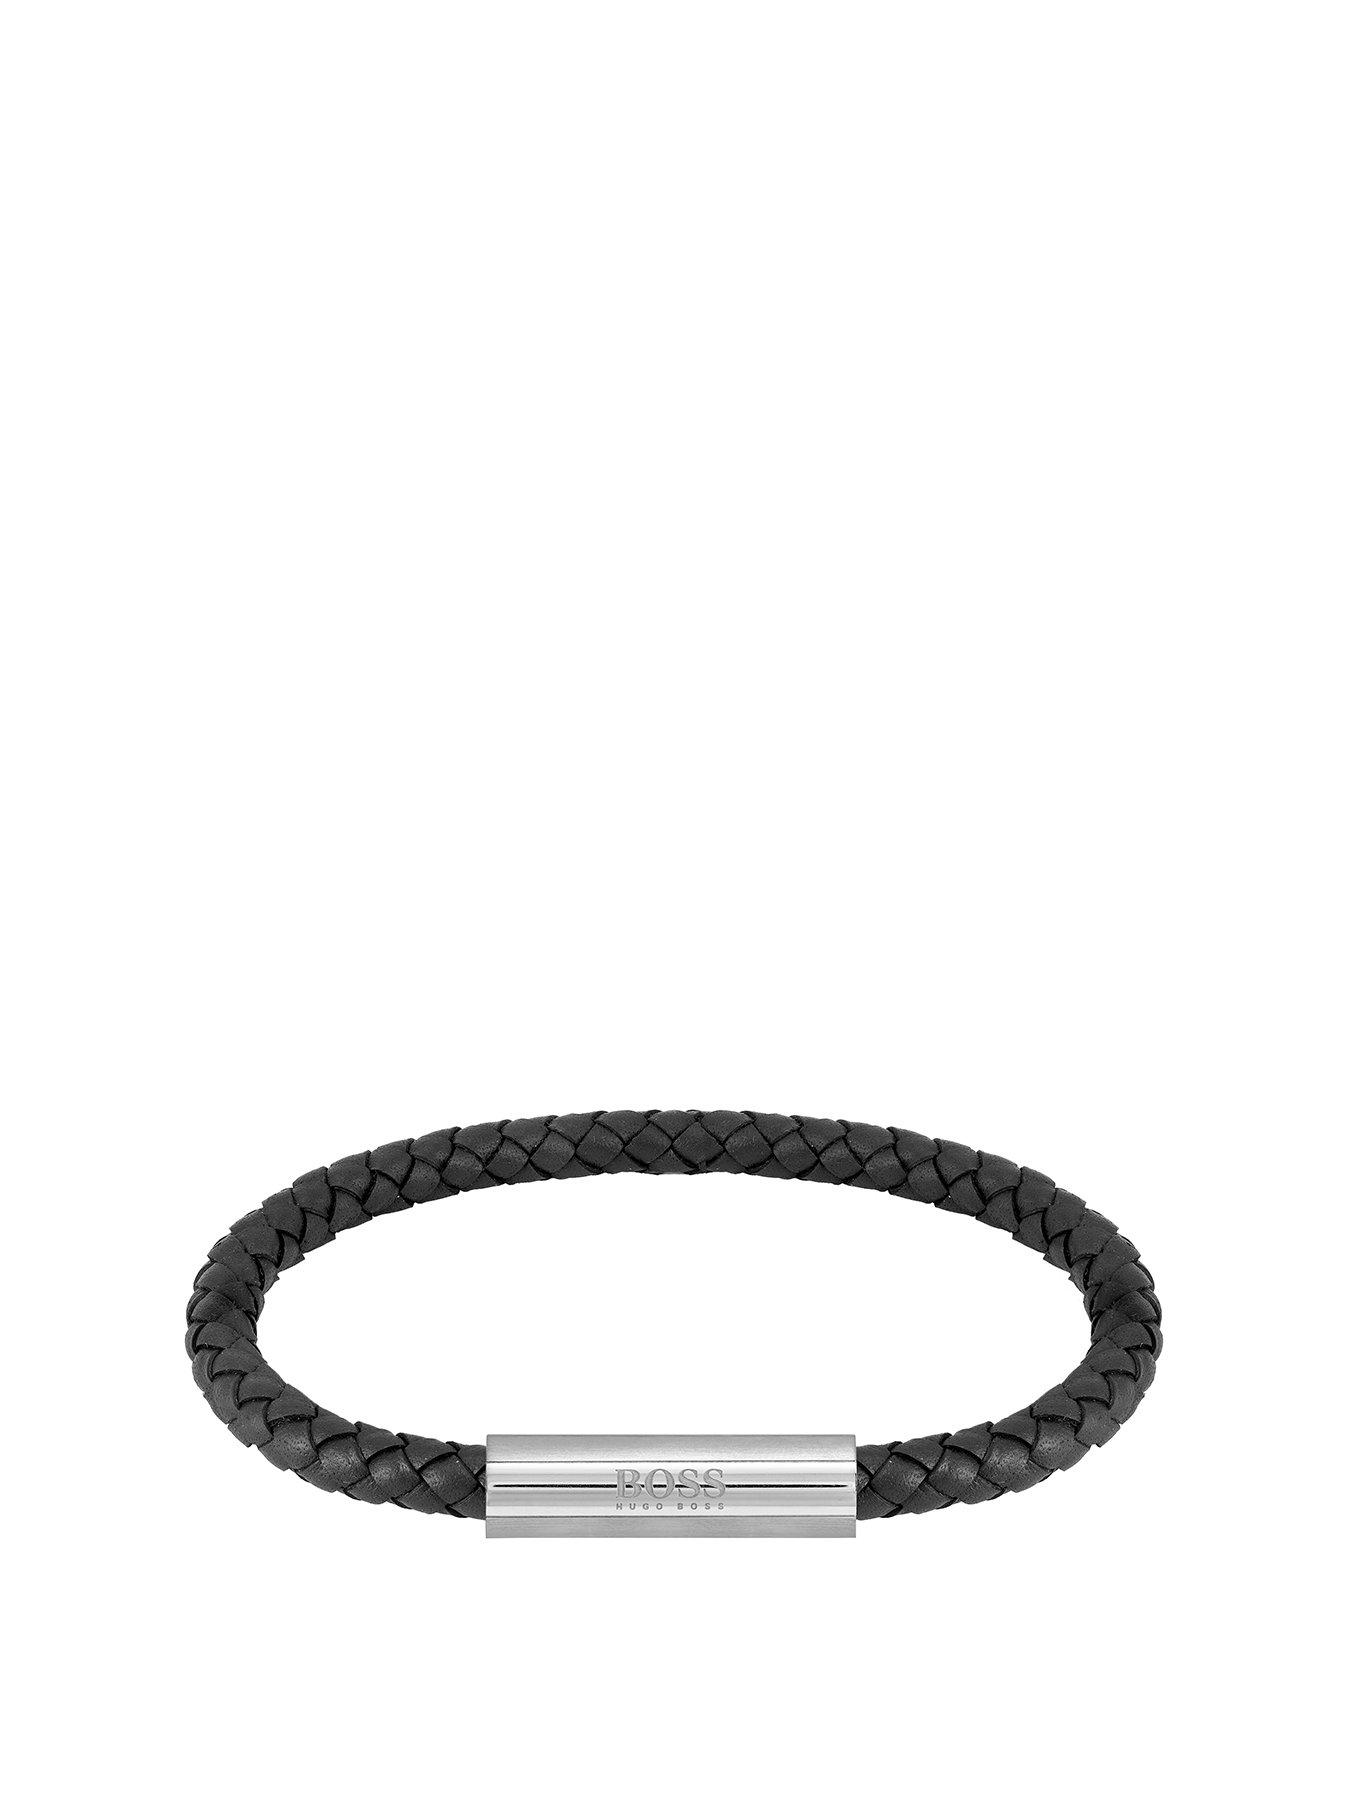 Men Braided Black Leather and Stainless Steel Gents Bracelet